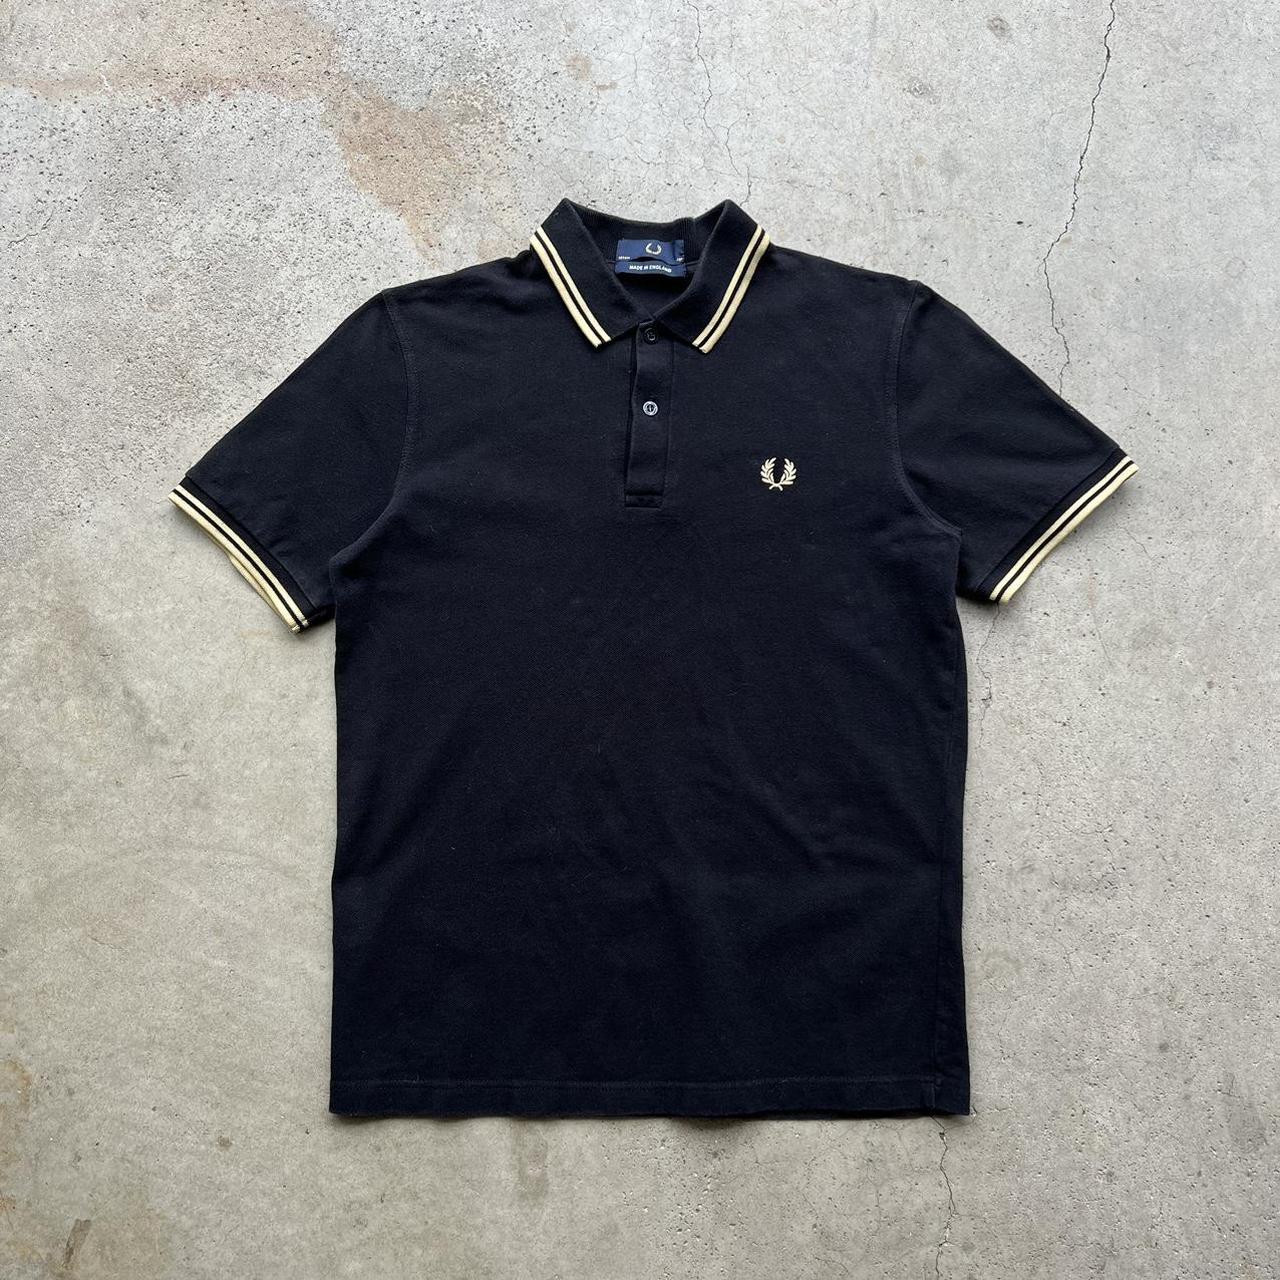 Fred Perry Men's Black and Gold Polo-shirts